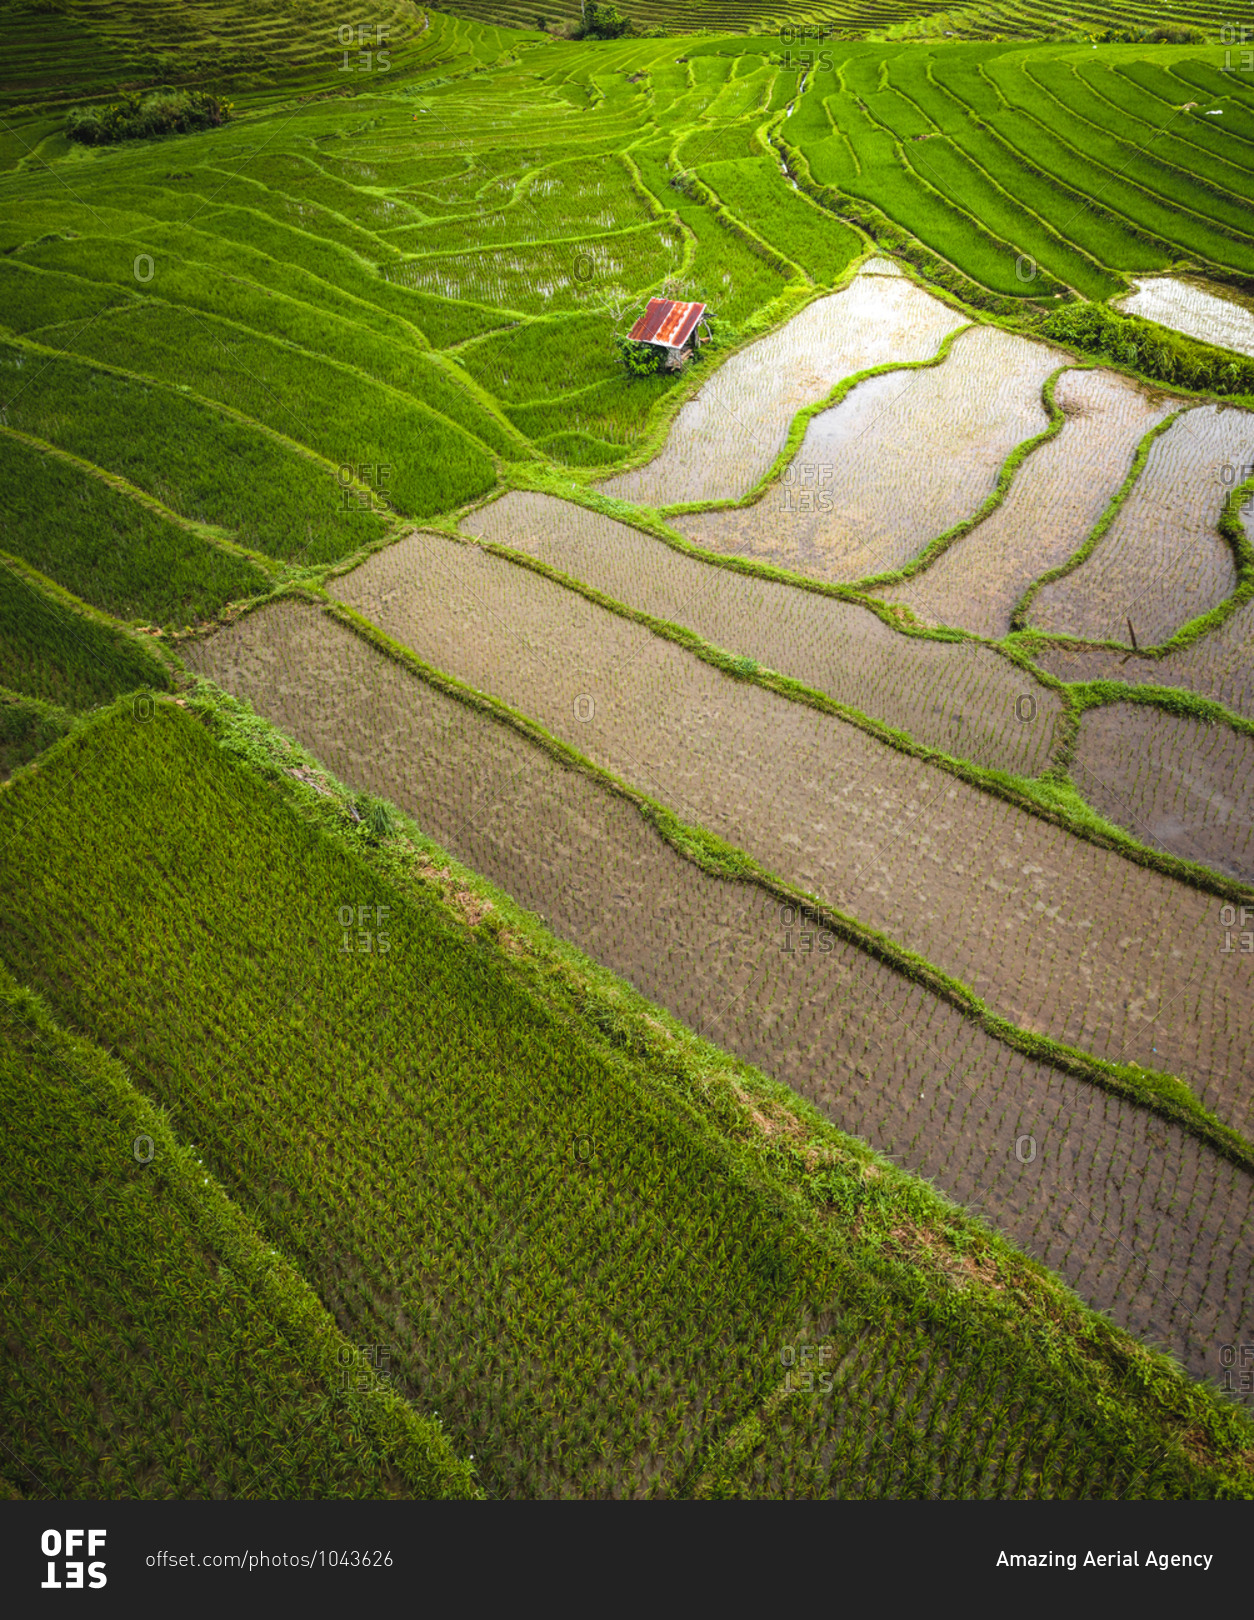 Aerial view of paddy rice fields in Guindulman region, the Philippines.